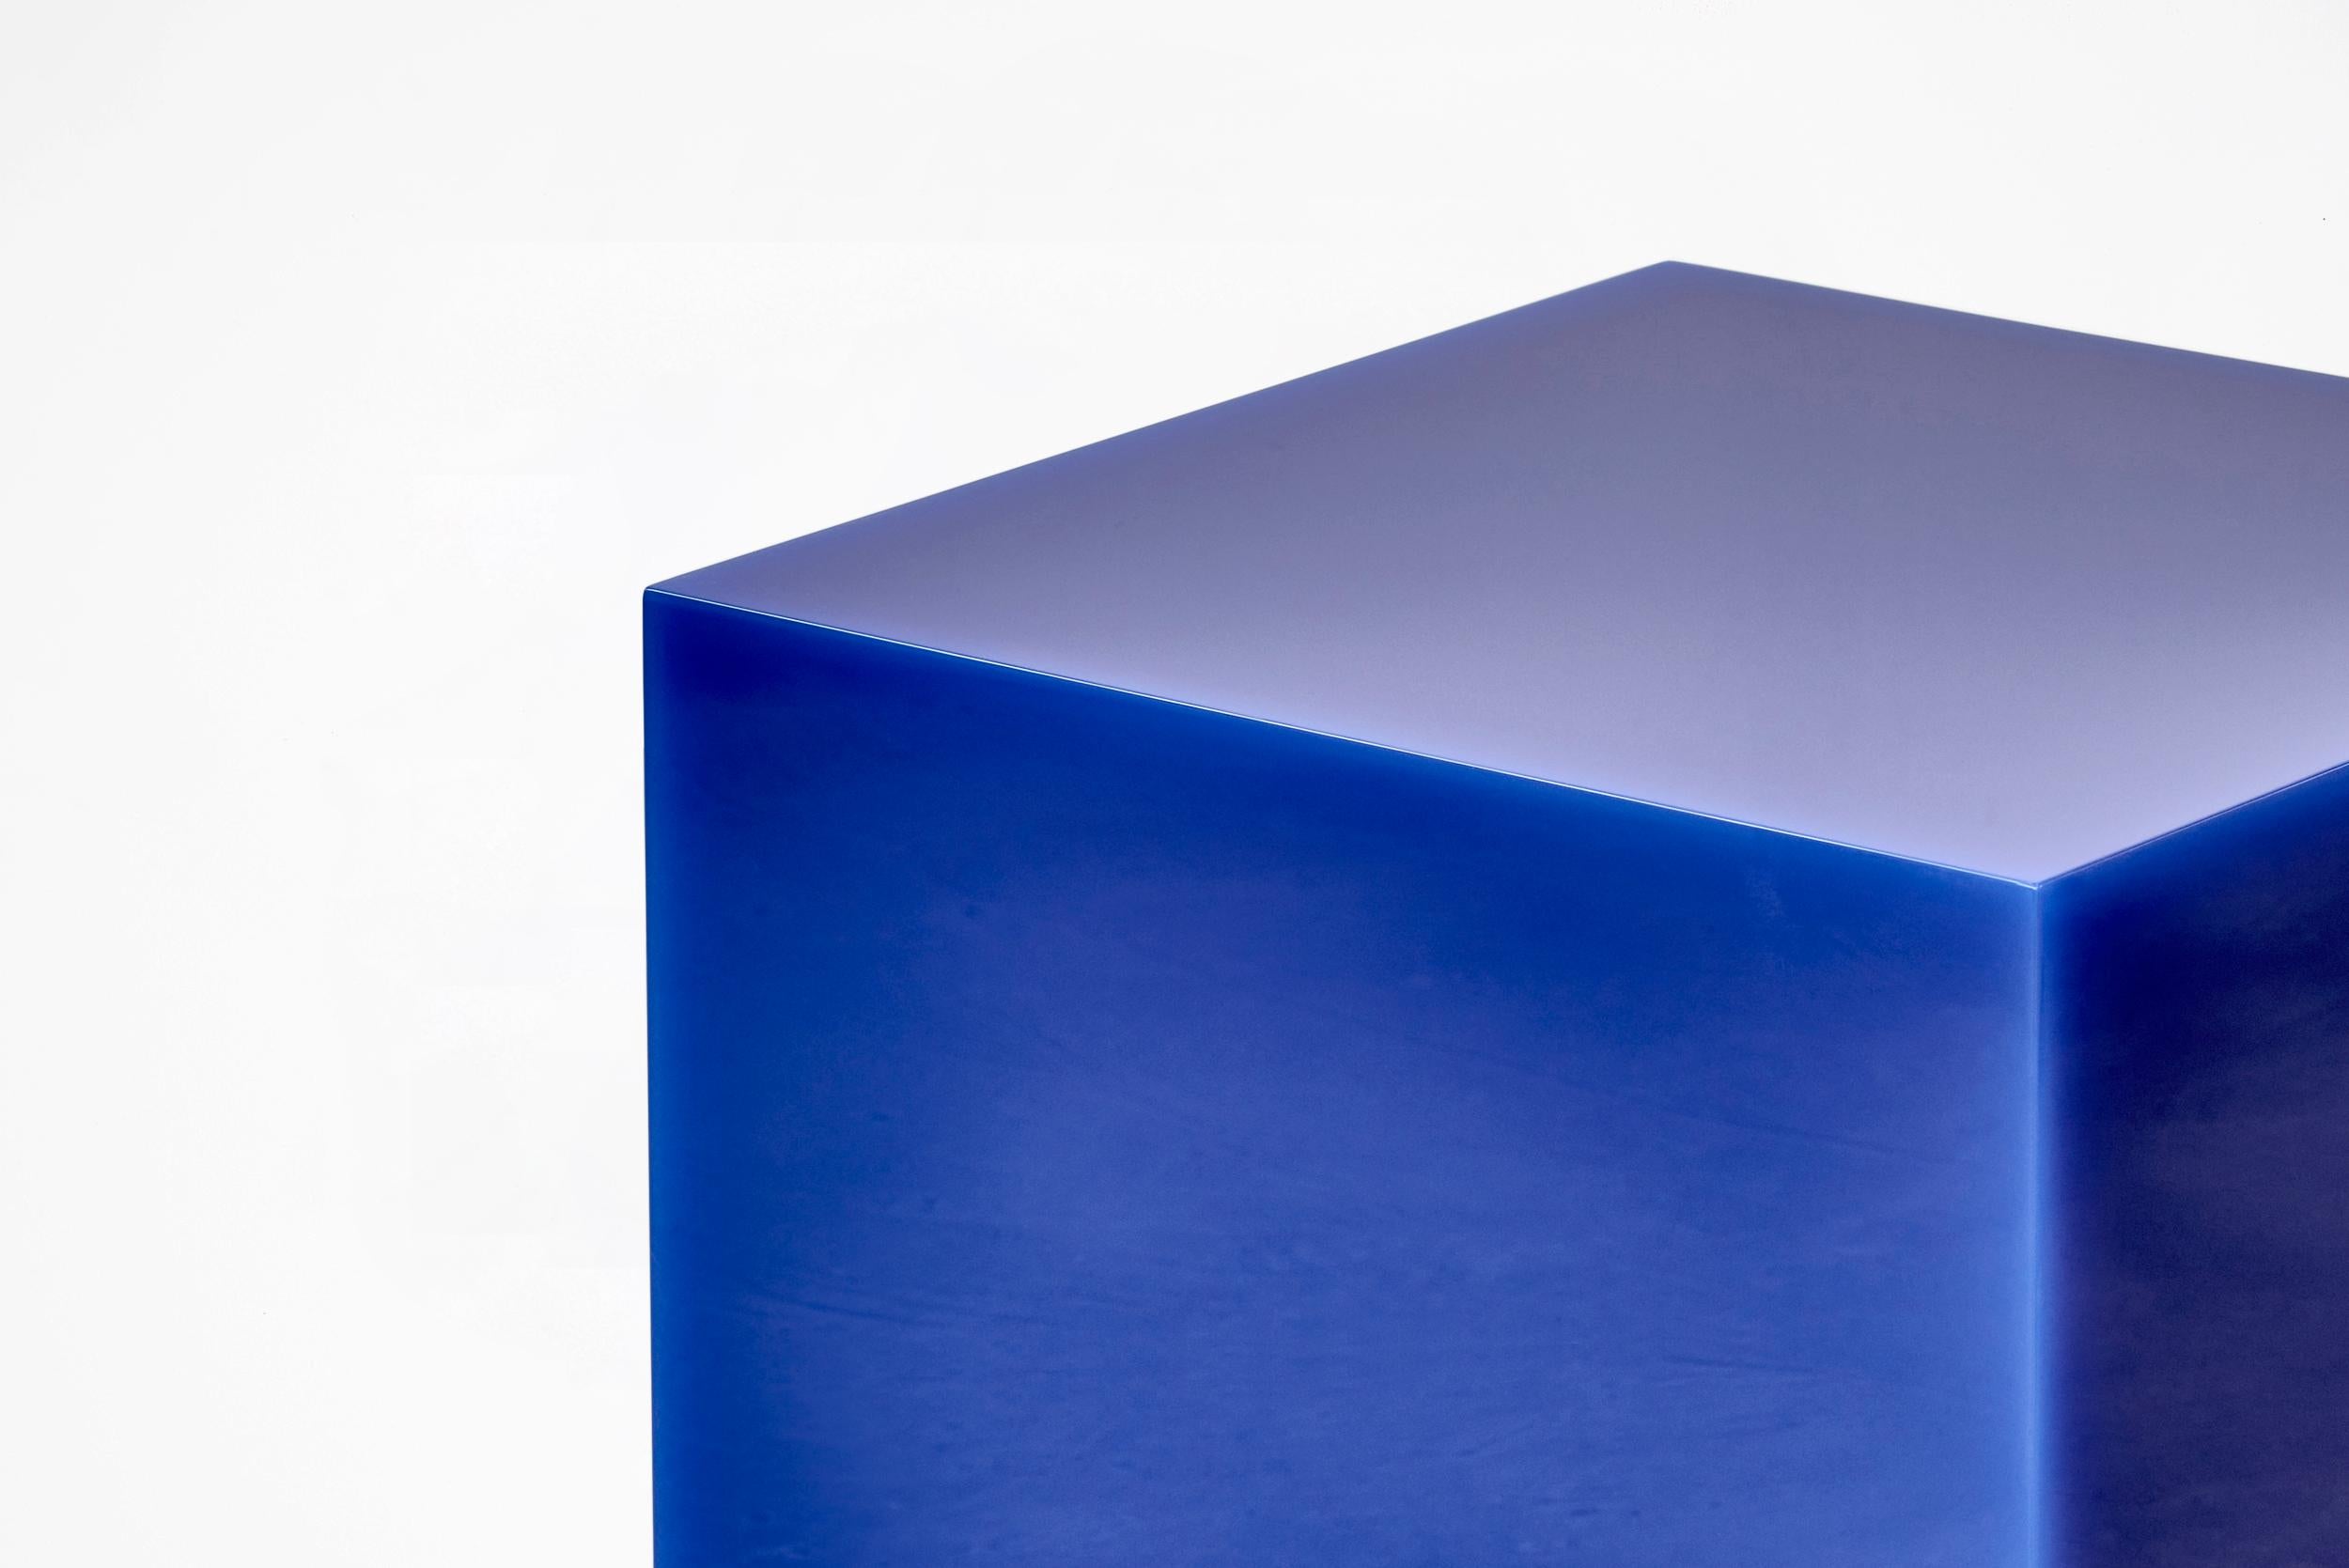 Sabine Marcelis

Freestanding Side Tables or Night Stands
“Candy Cubes” Series,
Rotterdam, The Netherlands, 2019
High polished single cast resin

Measurements

60cm W x 60cm D x 60cm H
23,62in W x 23.62in D x 23.62in H

60cm W x 60cm D x 30cm